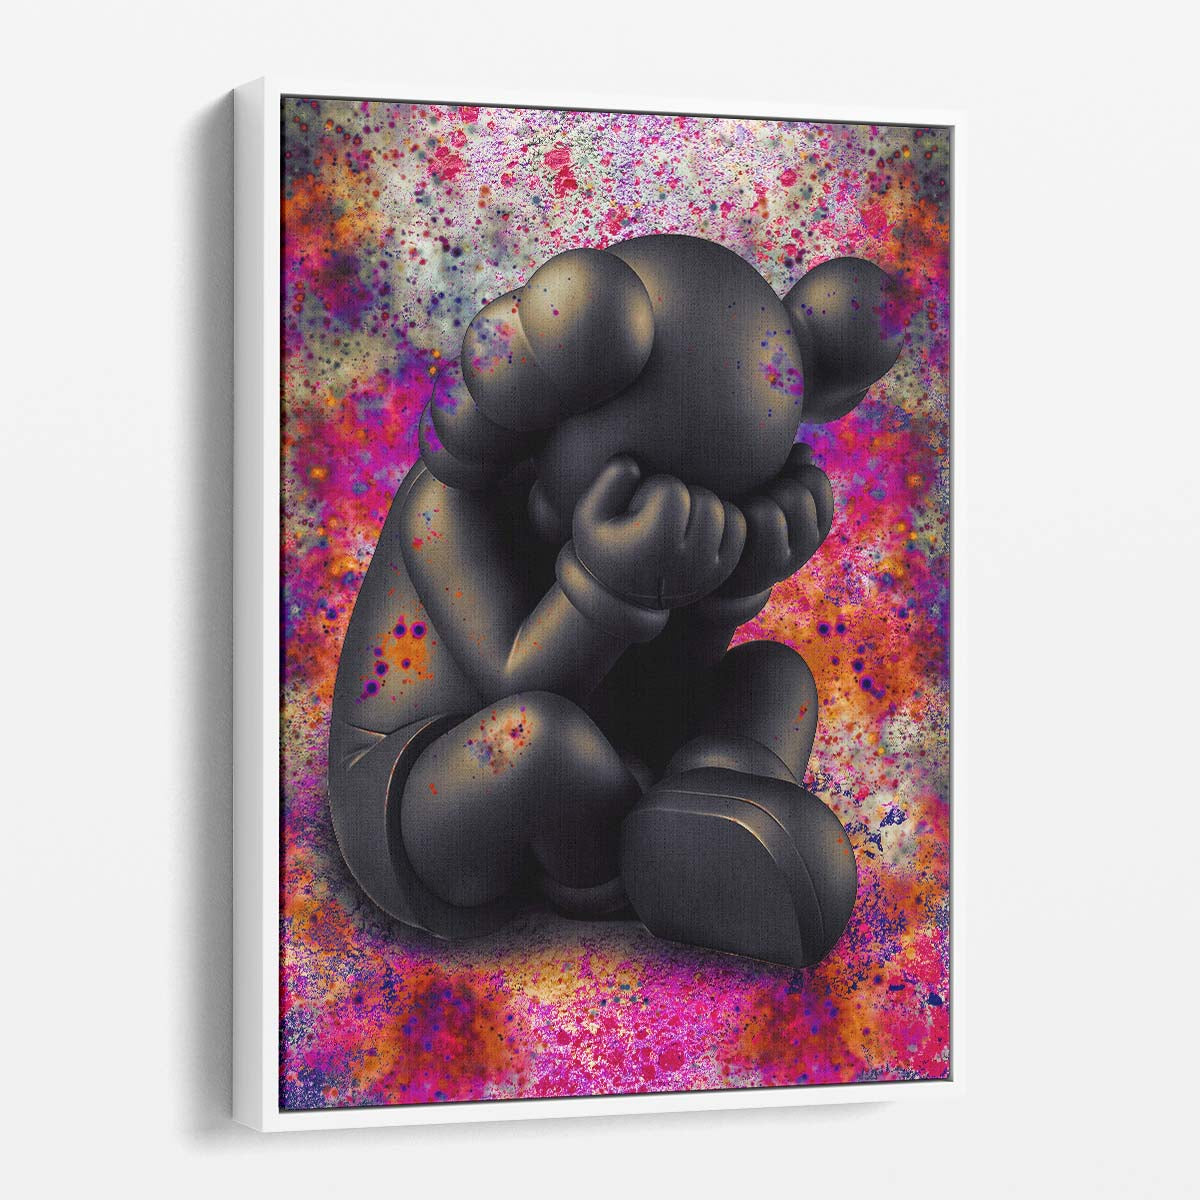 Kaws Separated Wall Art by Luxuriance Designs. Made in USA.